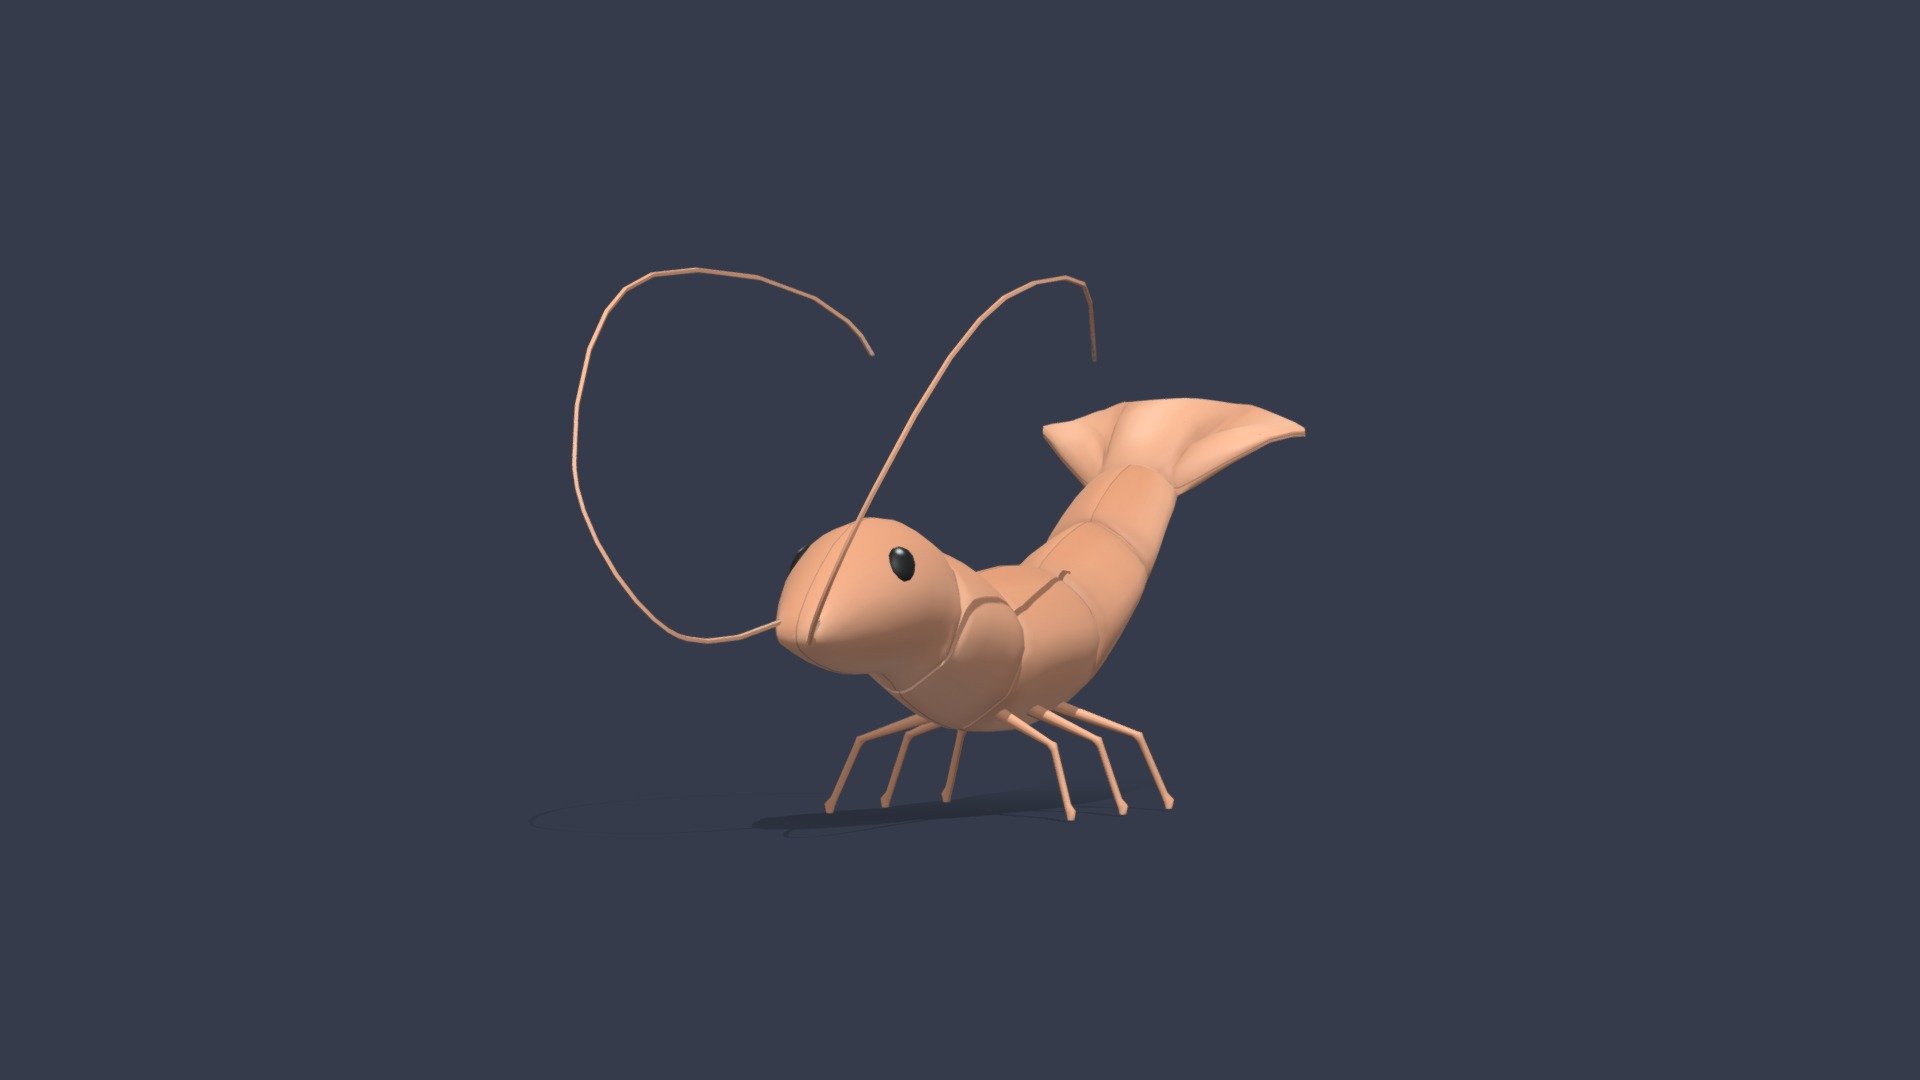 A Shrimp! Modeled and rigged in Cinema 4D R21, UV Unwrapped, 4k texture included. Fbx file for mesh and rig. If you use this asset please tag me in it (zw multimedia/ zack), would love to see what people make with it! If there’s any problems with the files let me know 3d model